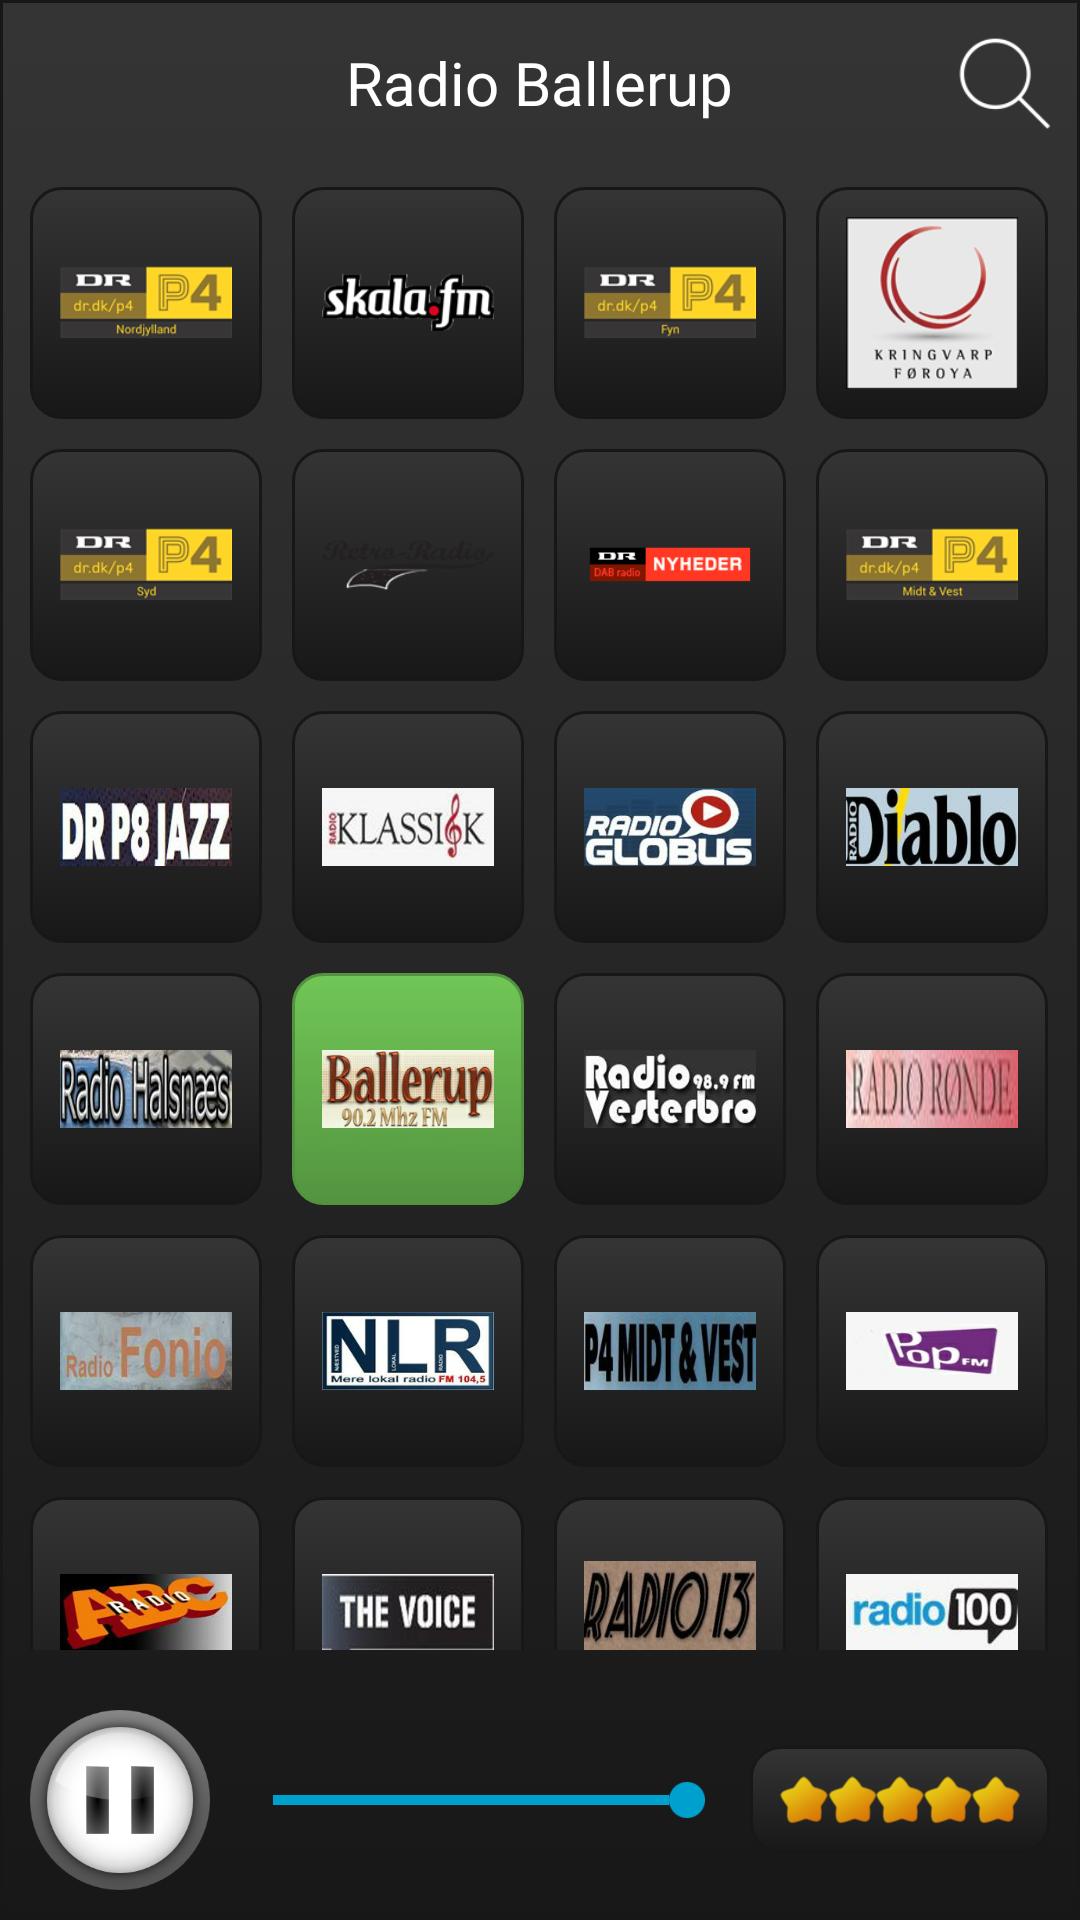 Radio Denmark for Android - APK Download